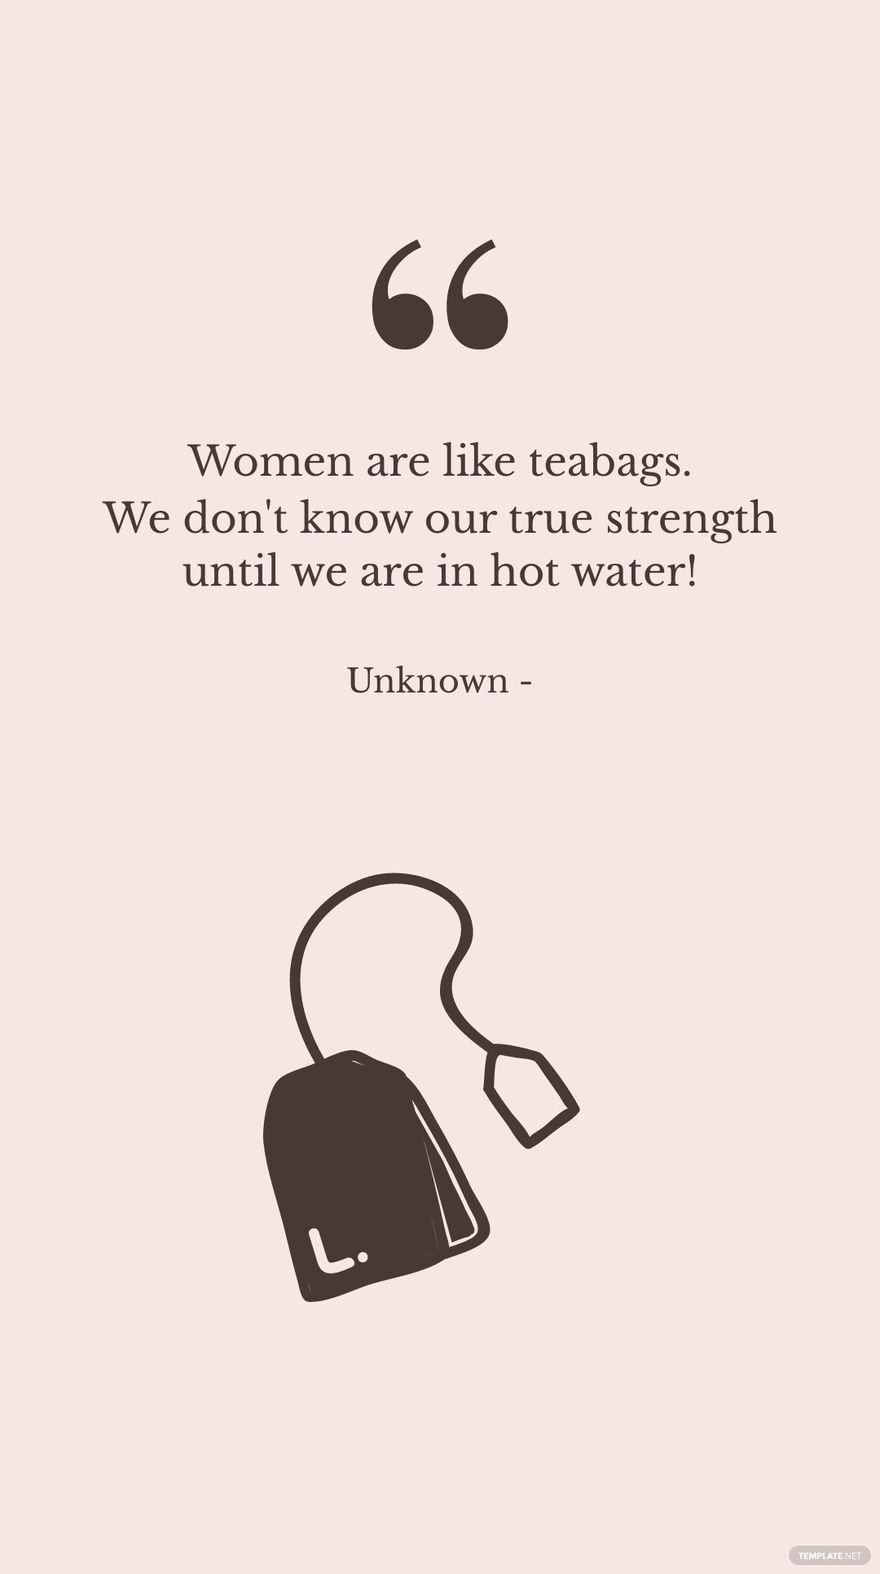 Free Unknown - Women are like teabags. We don't know our true strength until we are in hot water! in JPG